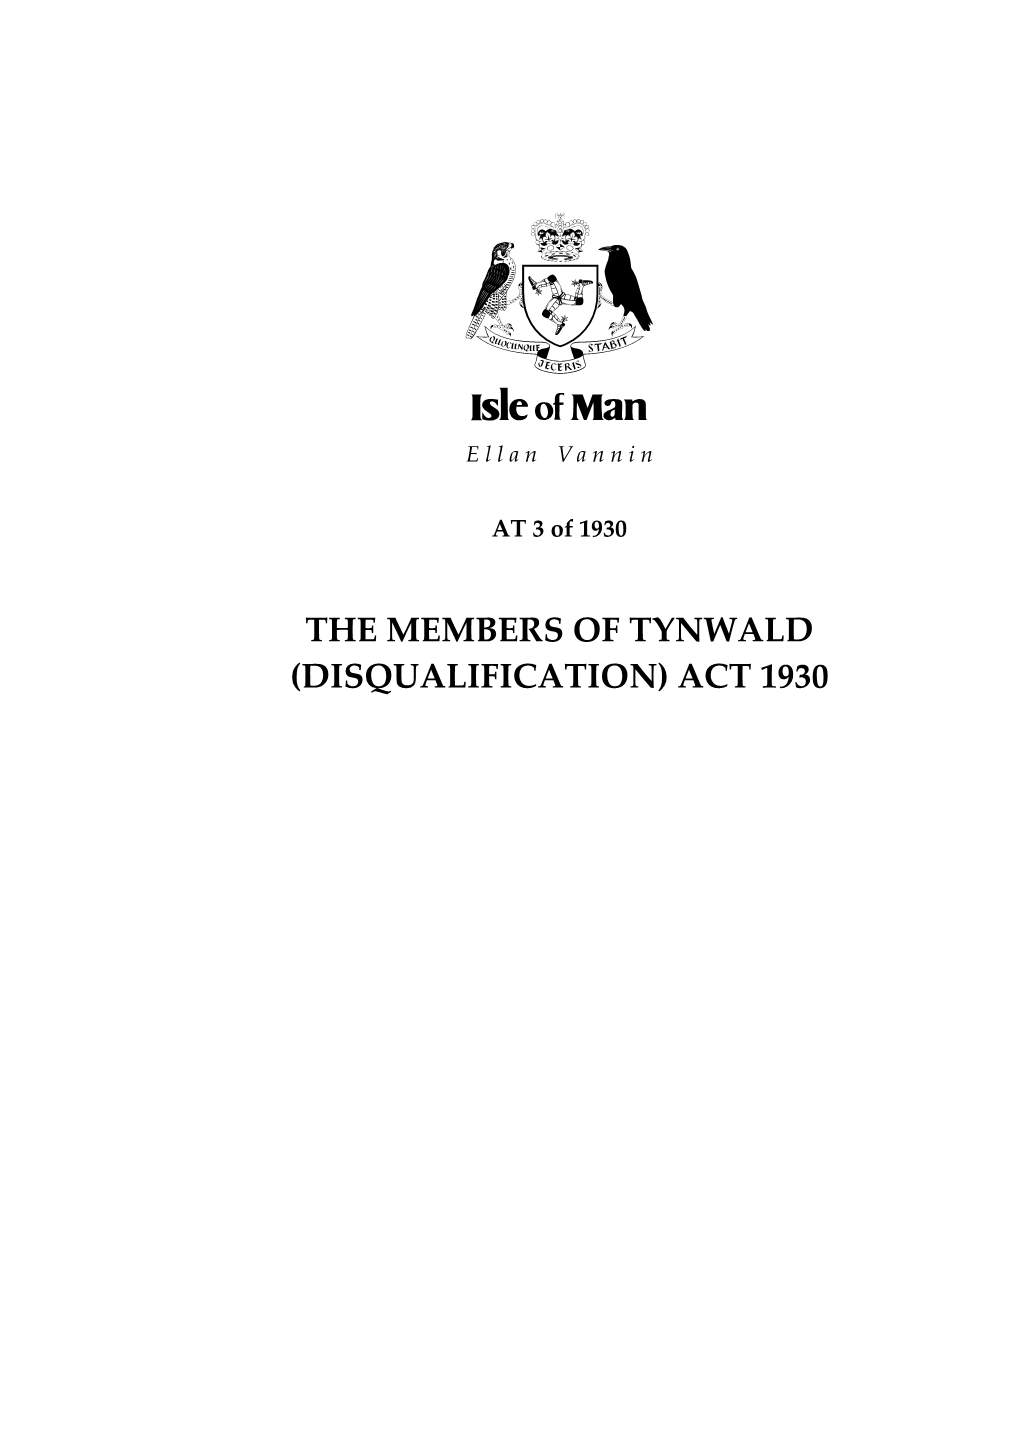 The Members of Tynwald (Disqualification) Act 1930